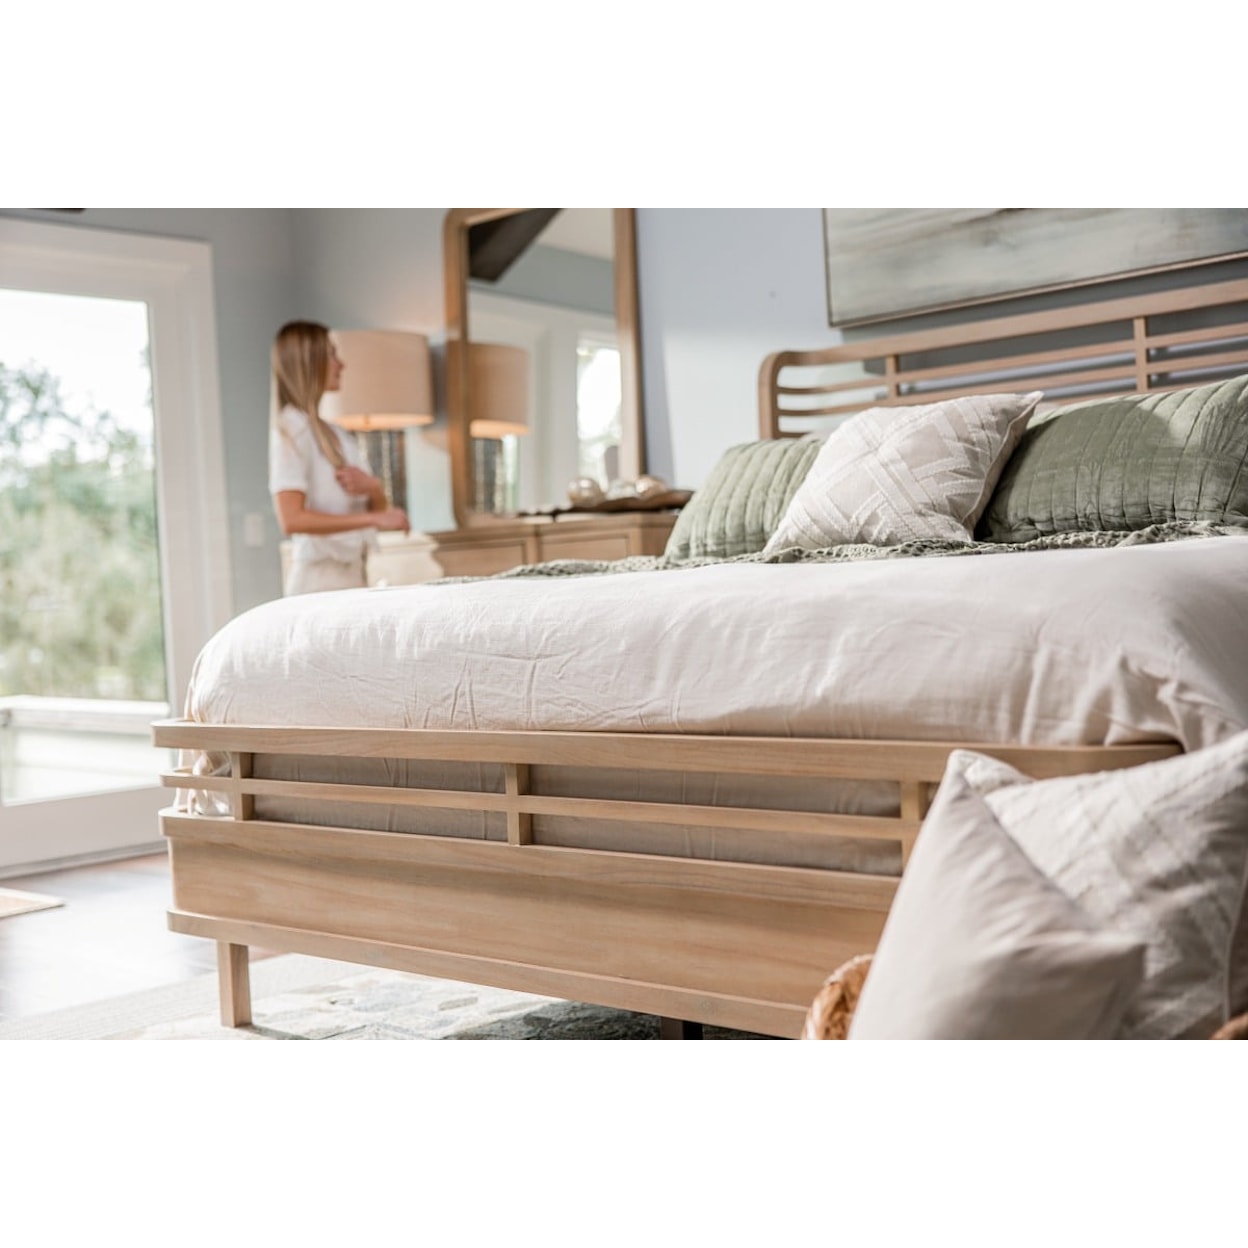 Sea Winds Trading Company Monterey Queen Bed